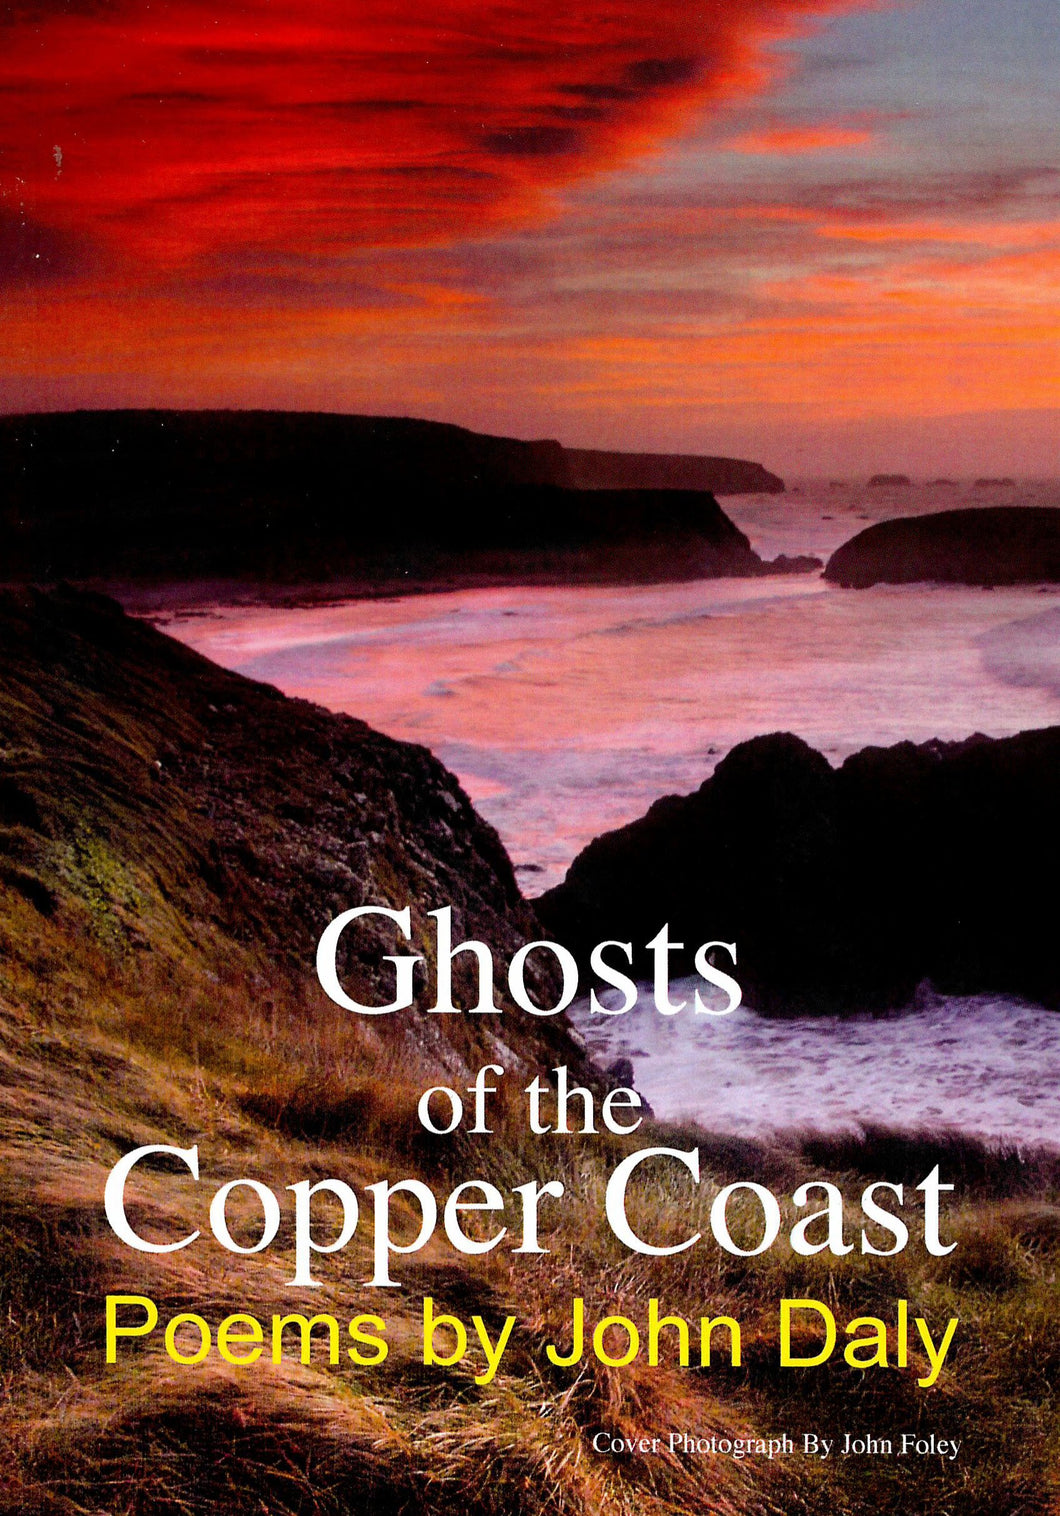 Ghosts of the Copper Coast